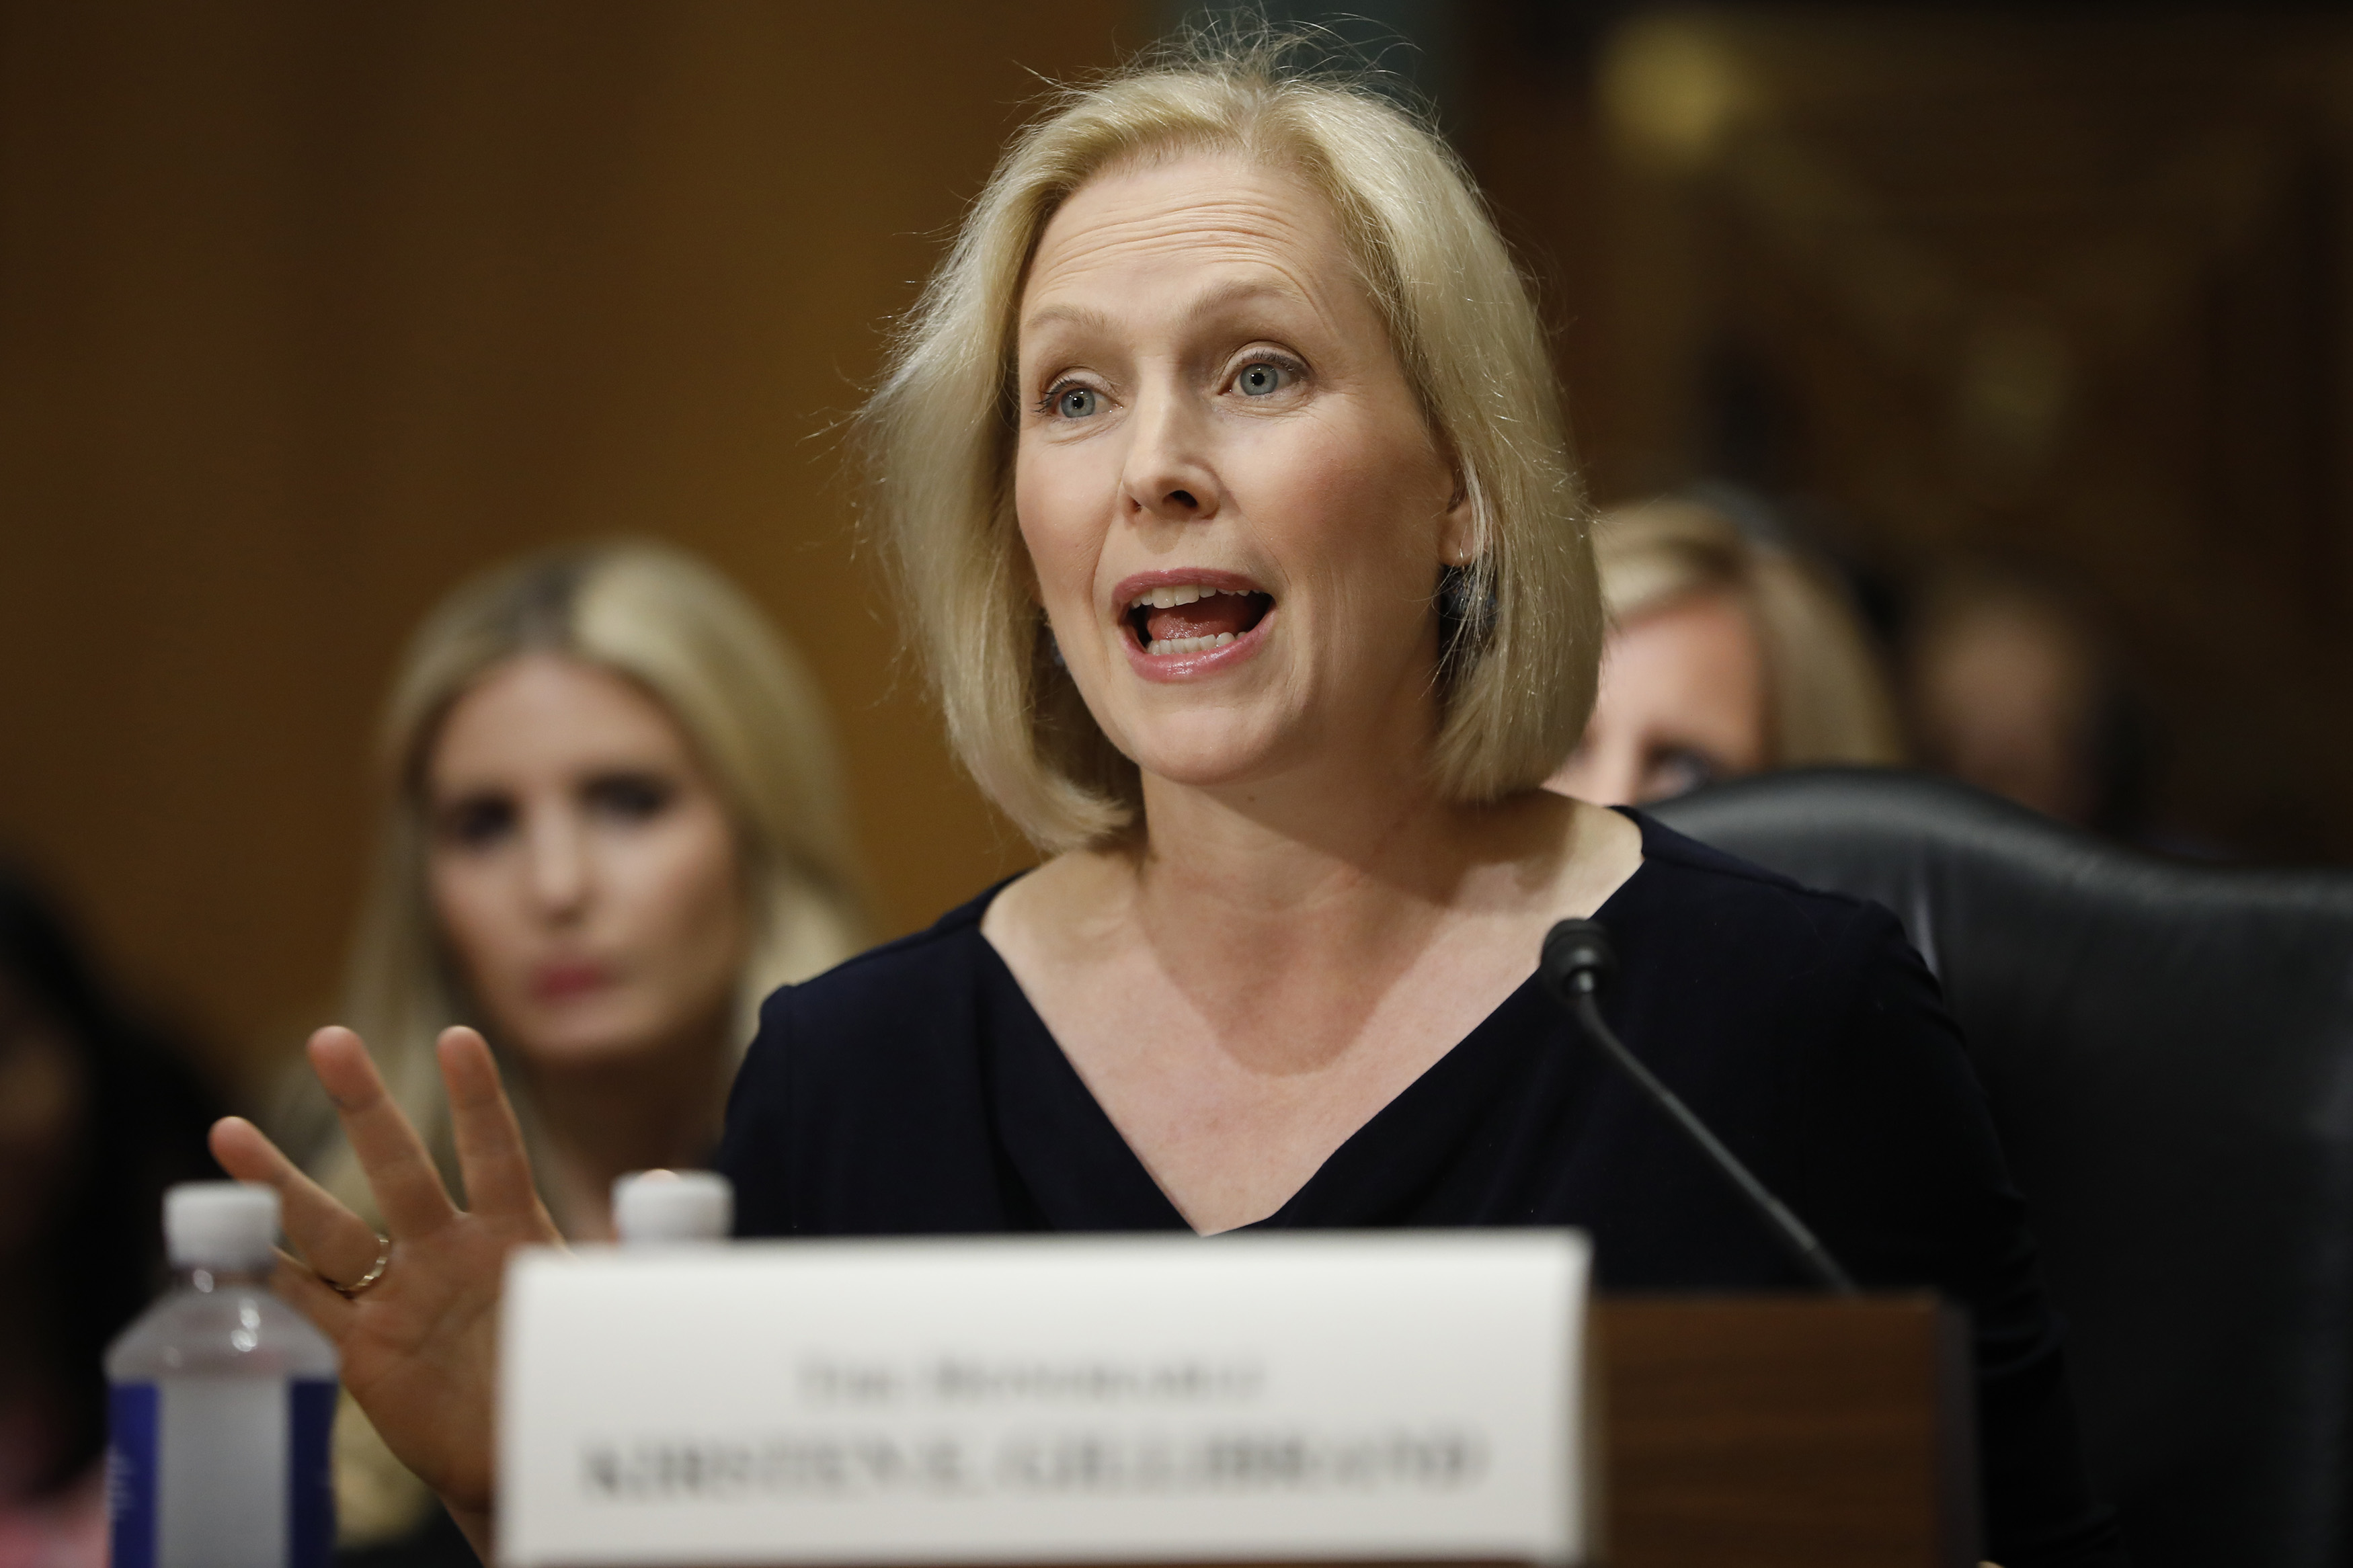 Sen. Kirsten Gillibrand (D-NY) speaks during a Commerce Committee hearing on paid family leave July 11, 2018 on Capitol Hill in Washington, D.C. (Aaron P. Bernstein&mdash;Getty Images)